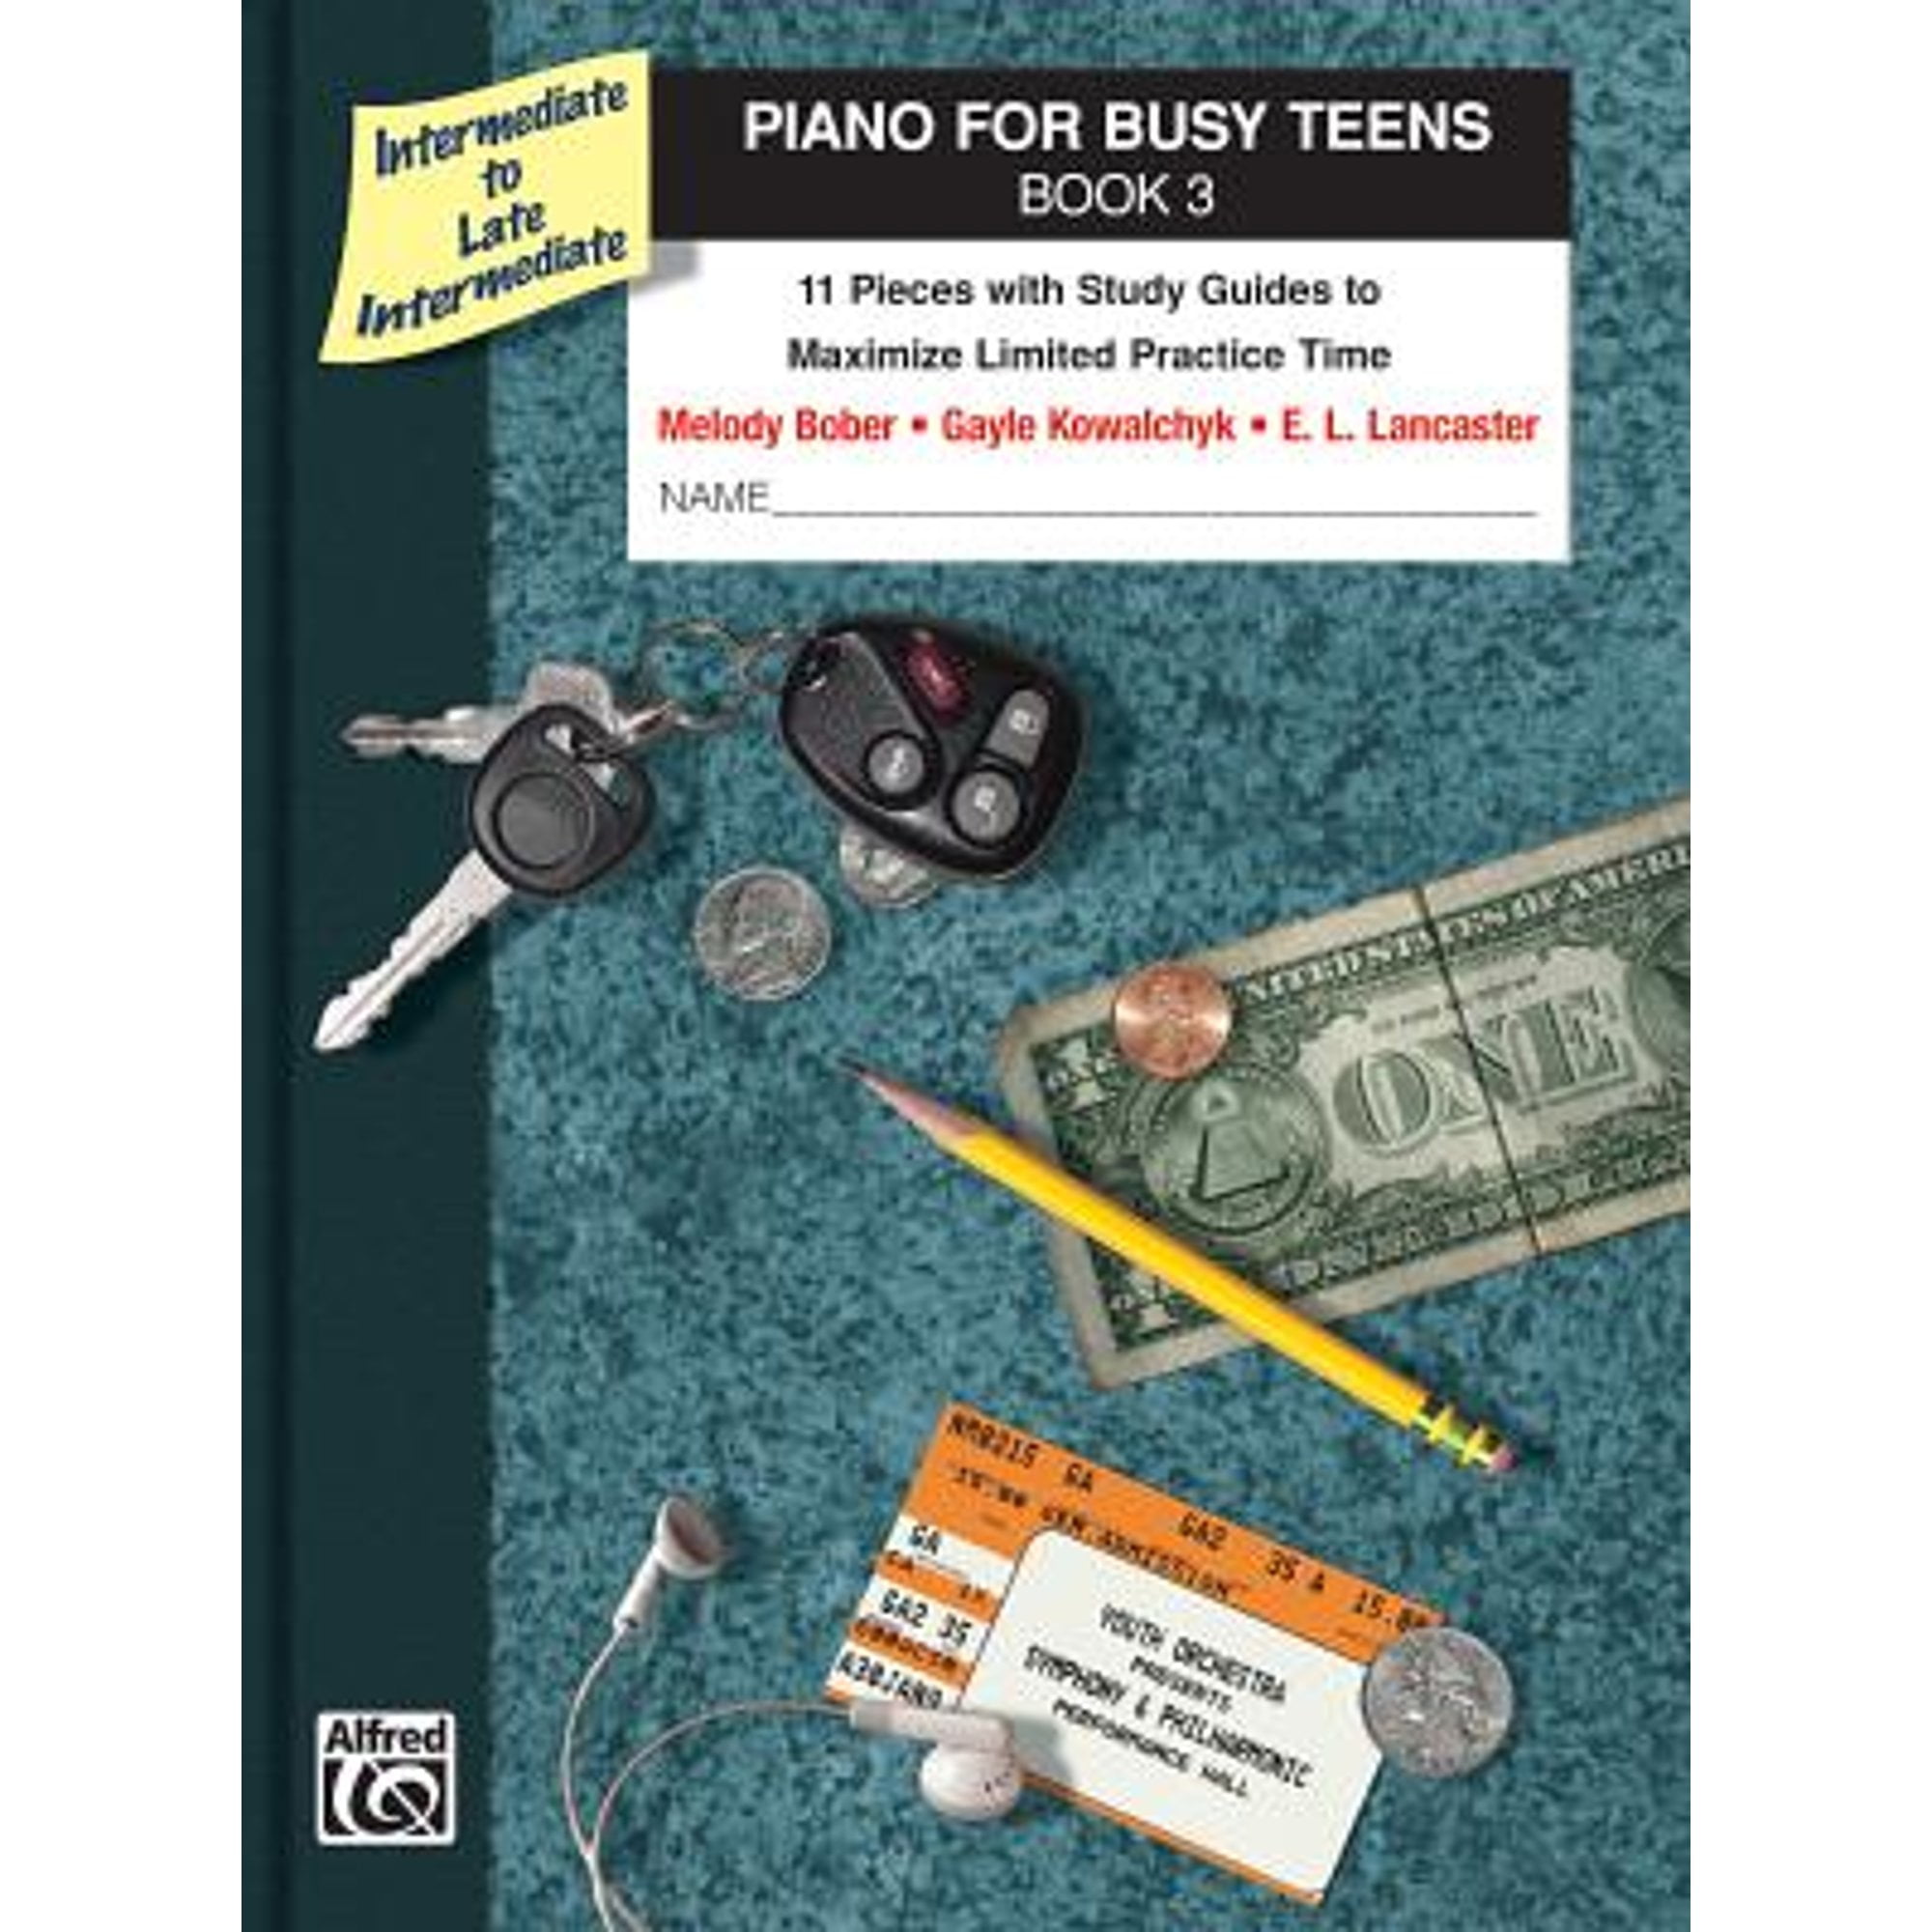 Pre-Owned Piano for Busy Teens, Book 3: 11 Pieces with Study Guides to Maximize Limited Practice (Paperback 9780739061688) by Melody Bober, Gayle Kowalchyk, E L Lancaster